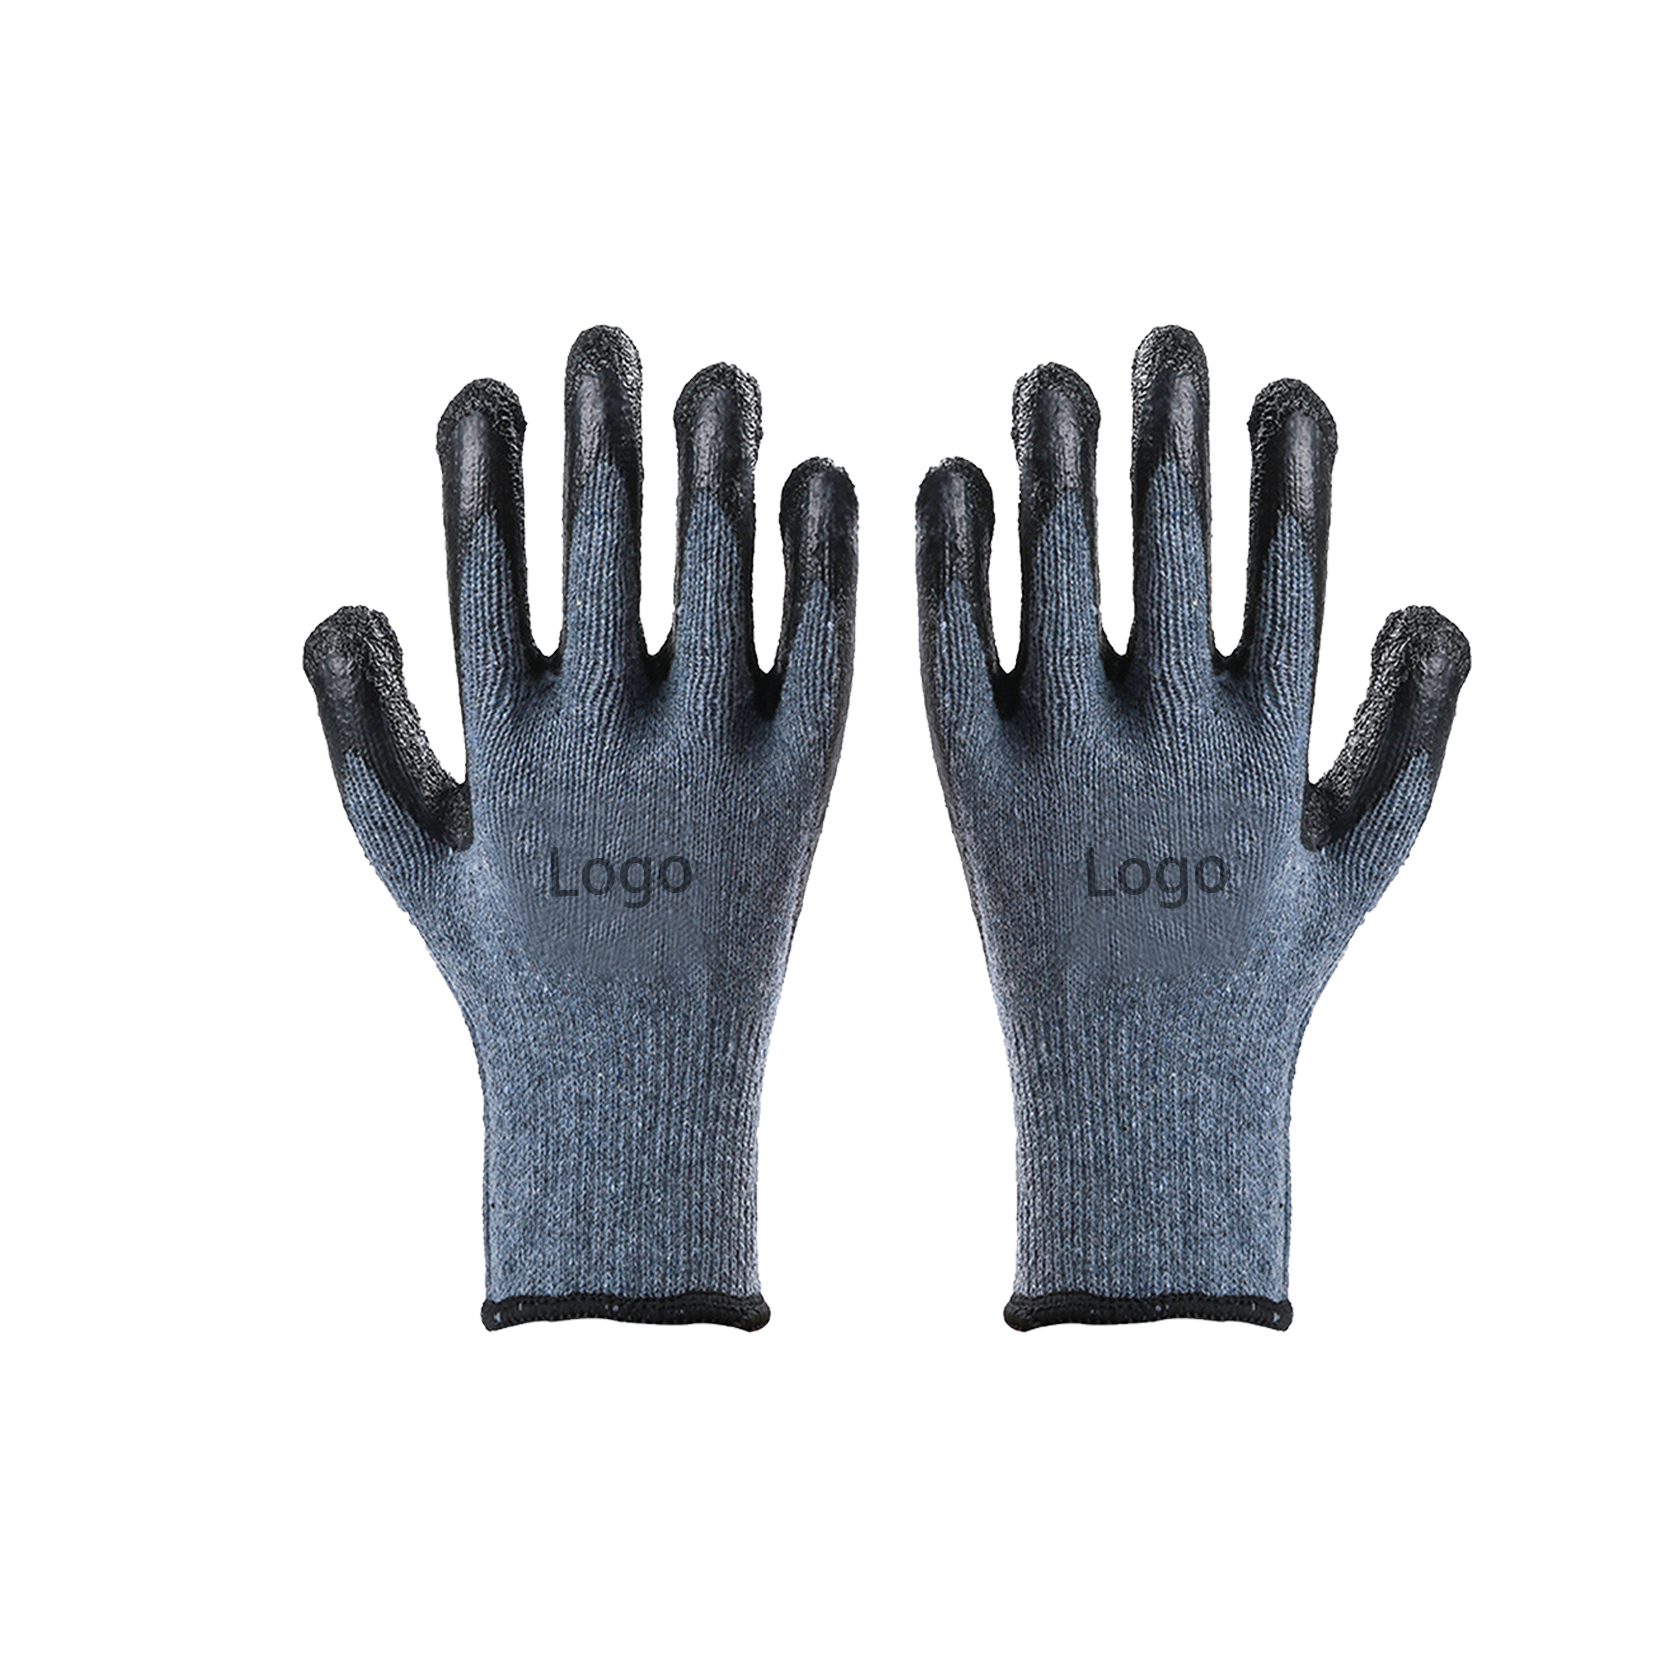 All-Purpose Work Gloves na may Latex Coated Palm Gloves